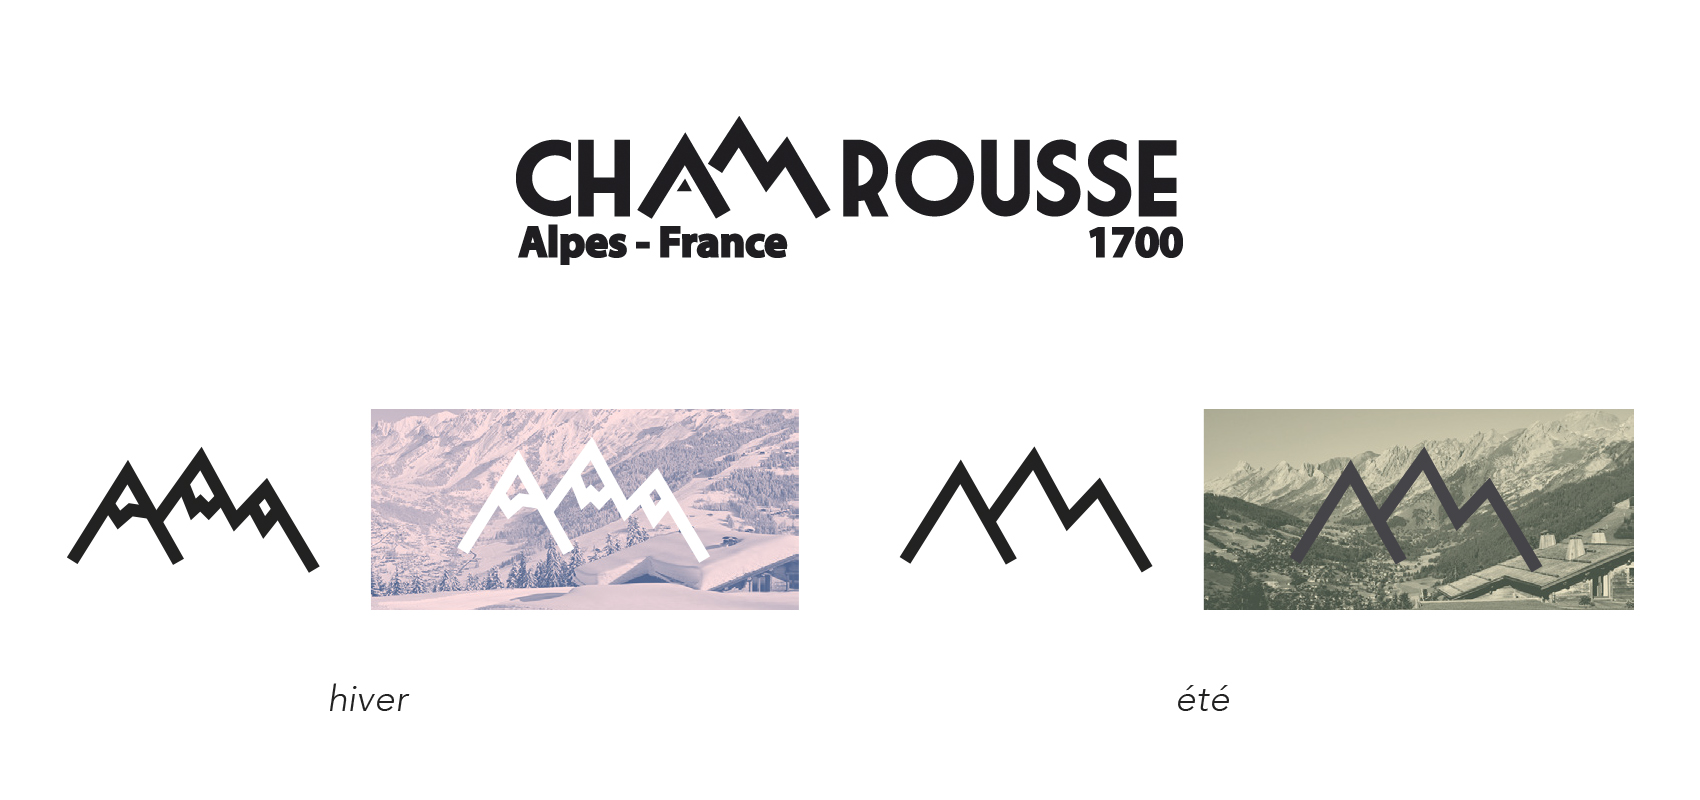 Chamrousse: Tourism Office remade!